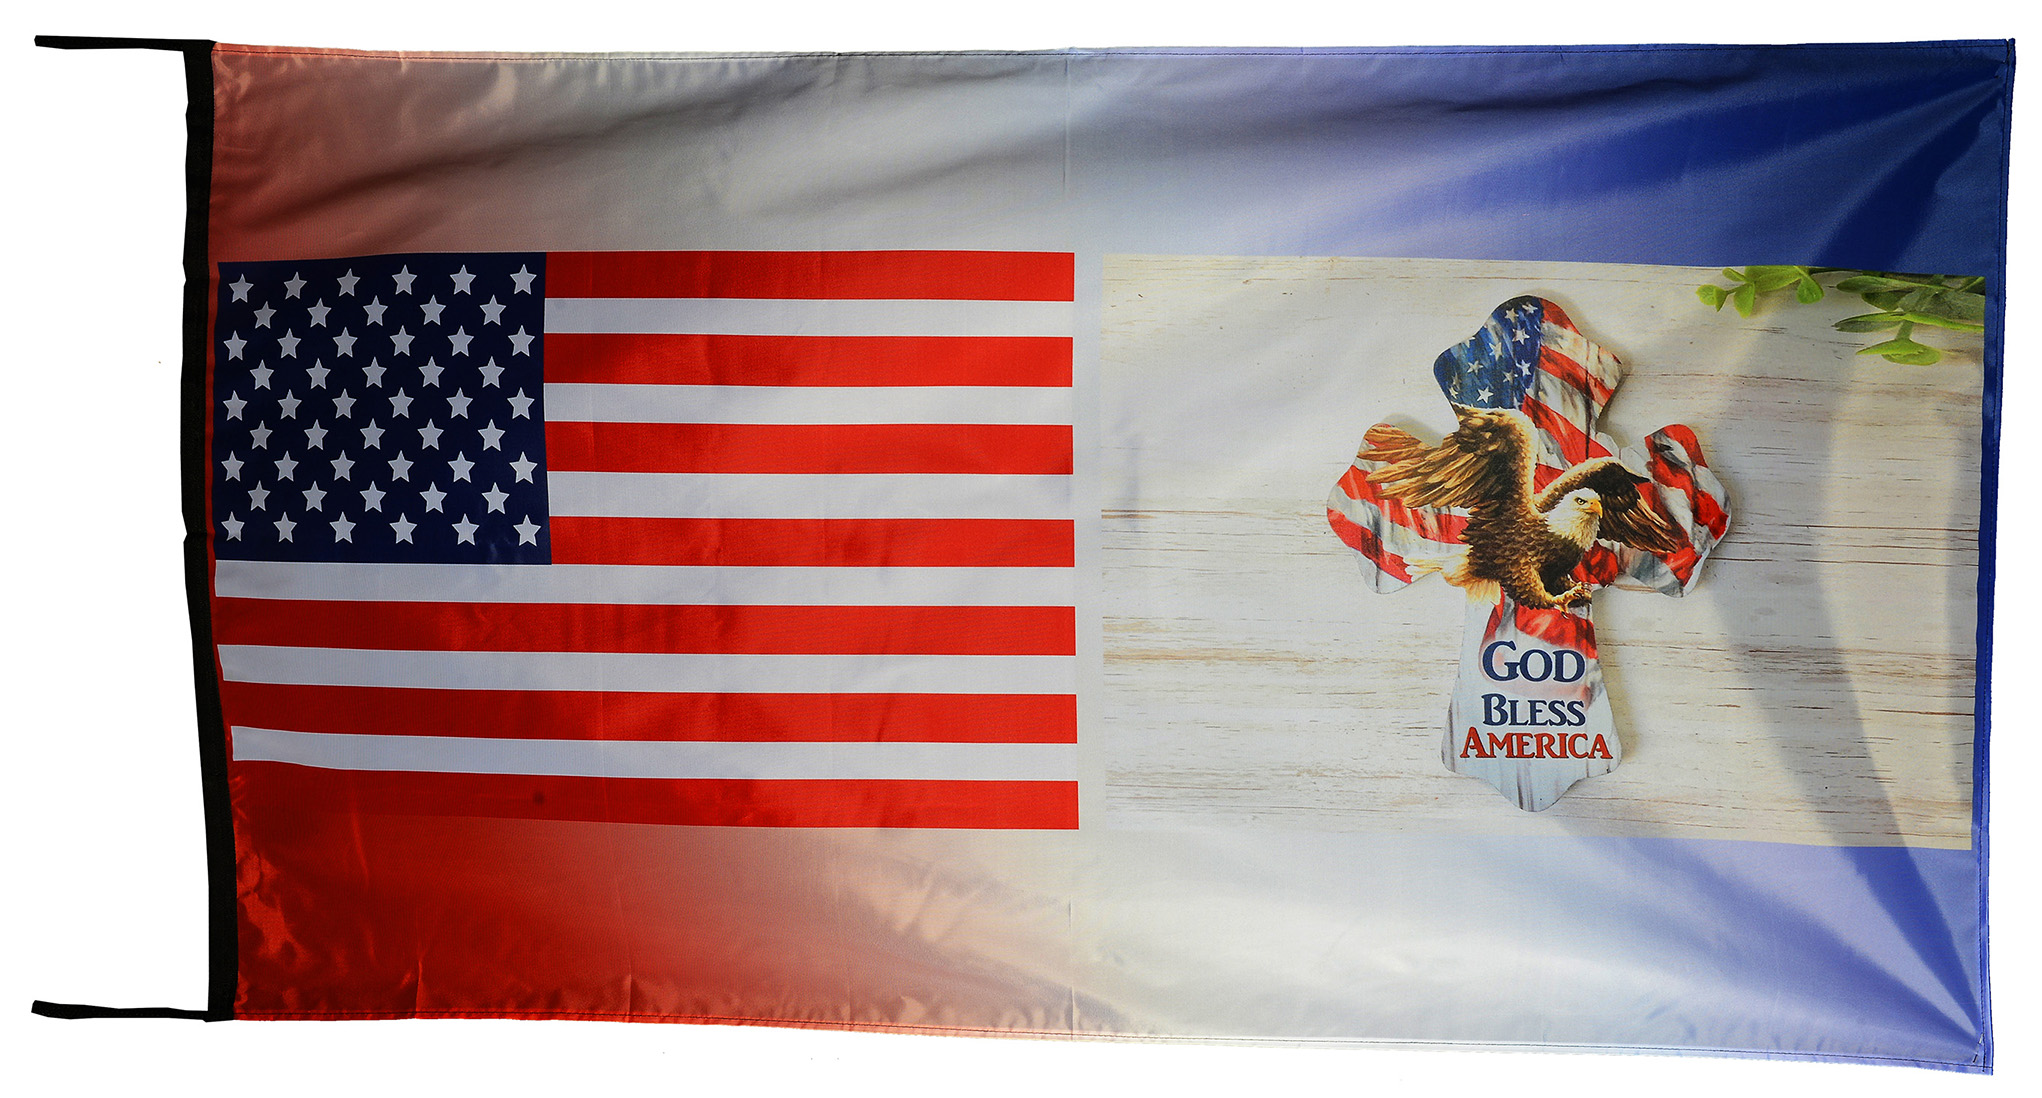 Flag  137 USA / US Country / United States Of America and God Bless America / Patriotic / Pride Hybrid Weather-Resistant Polyester Outdoor Flag Landscape Banner / Vivid Colors / 3 X 5 FT (150 x 90cm) International Flags for Sale